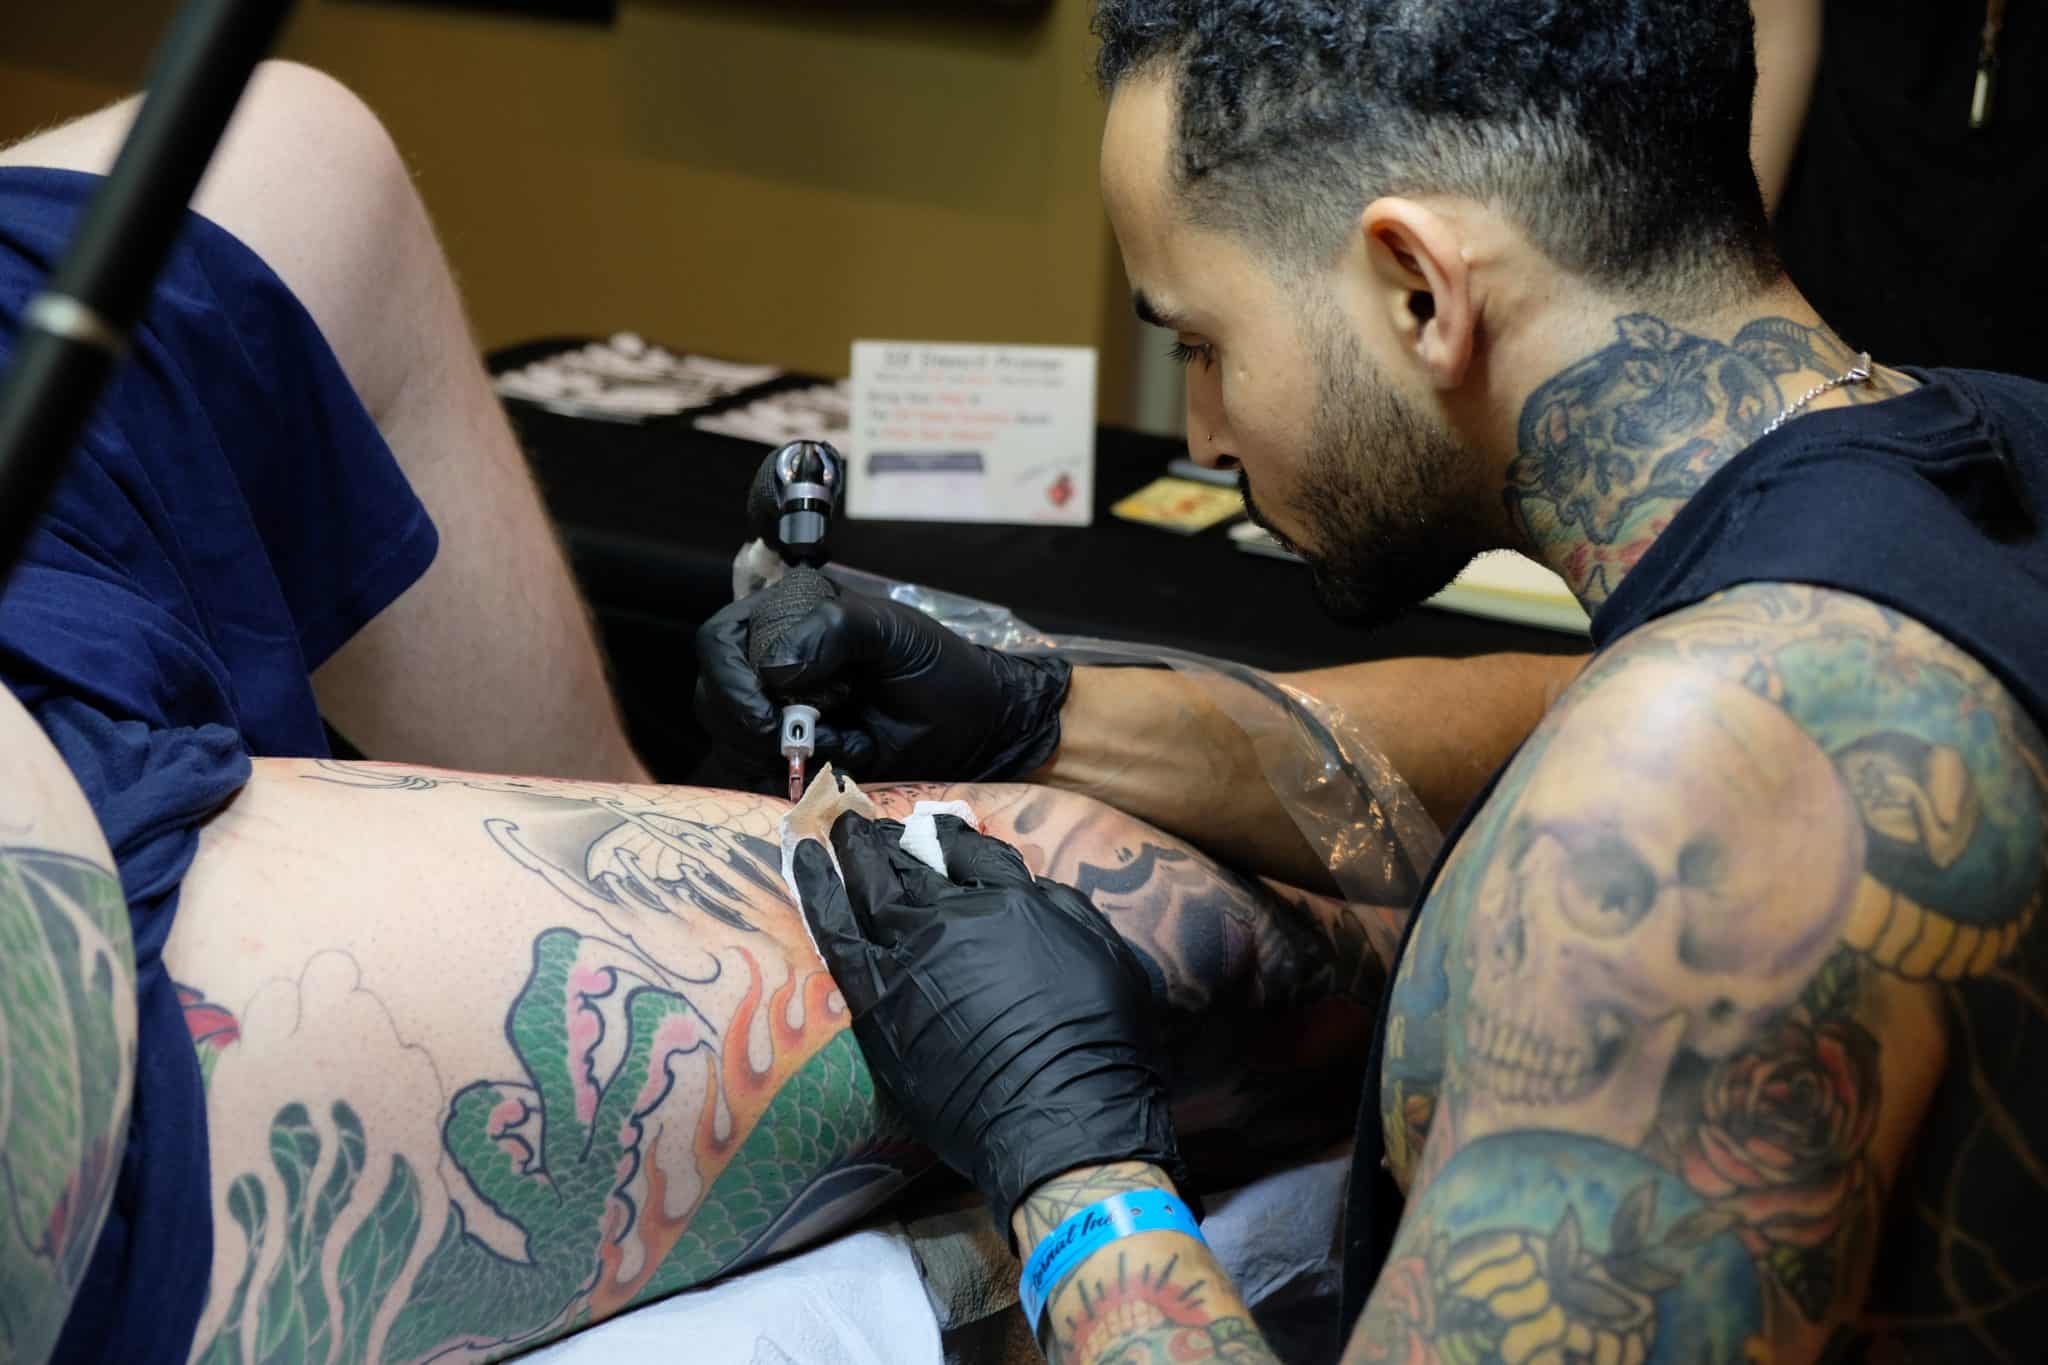 What Causes A Tattoo Rash How To Treat It